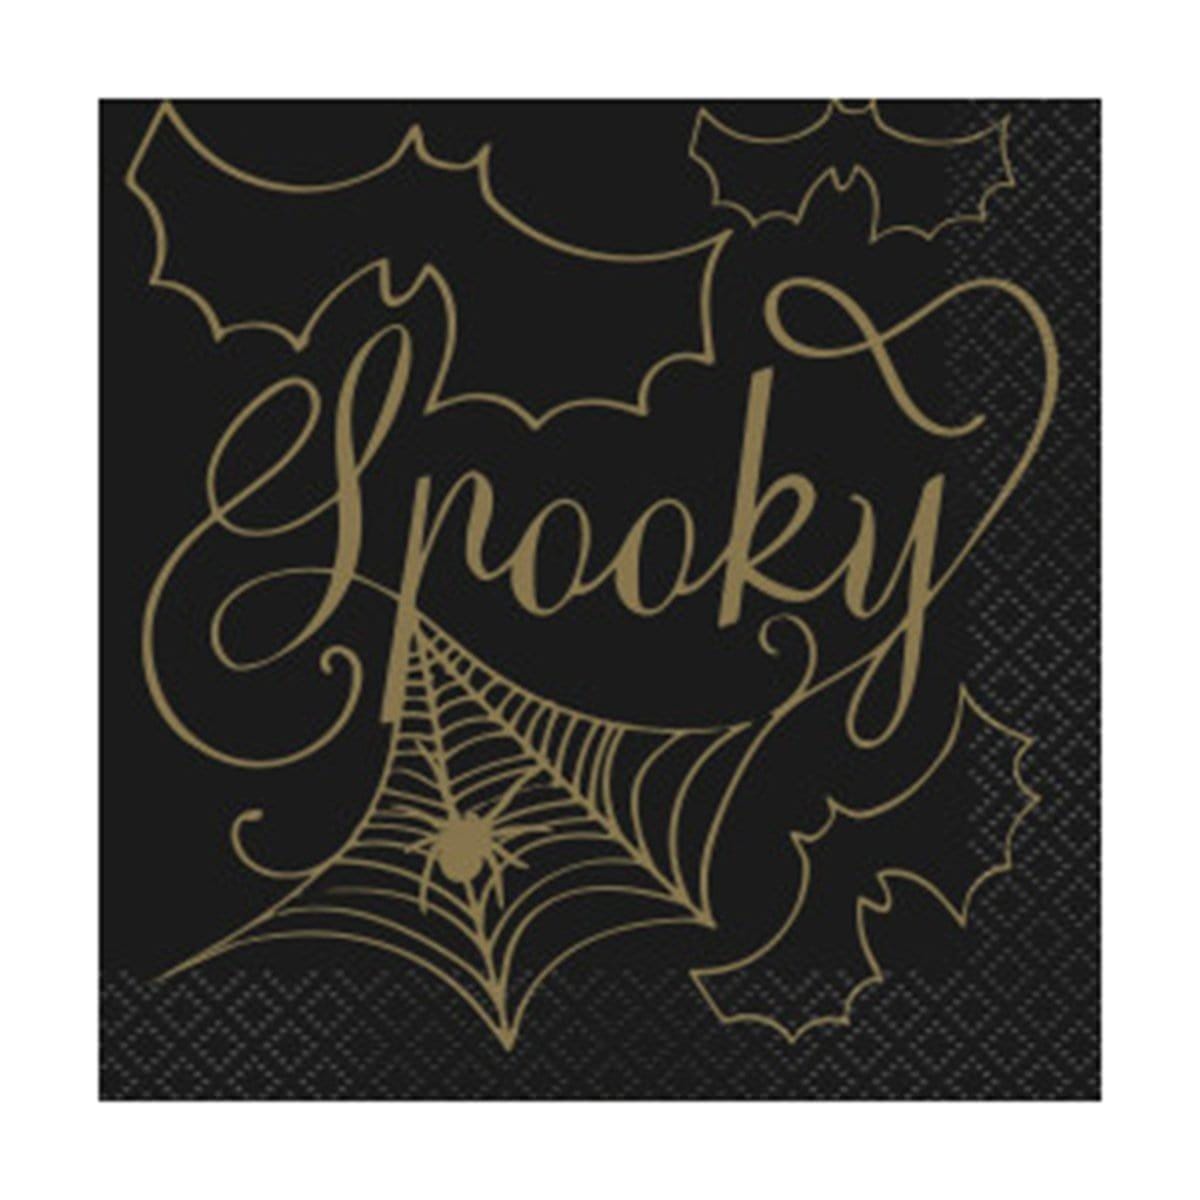 Buy Halloween Black & Gold Spider Web beverage napkins, 16 per package sold at Party Expert